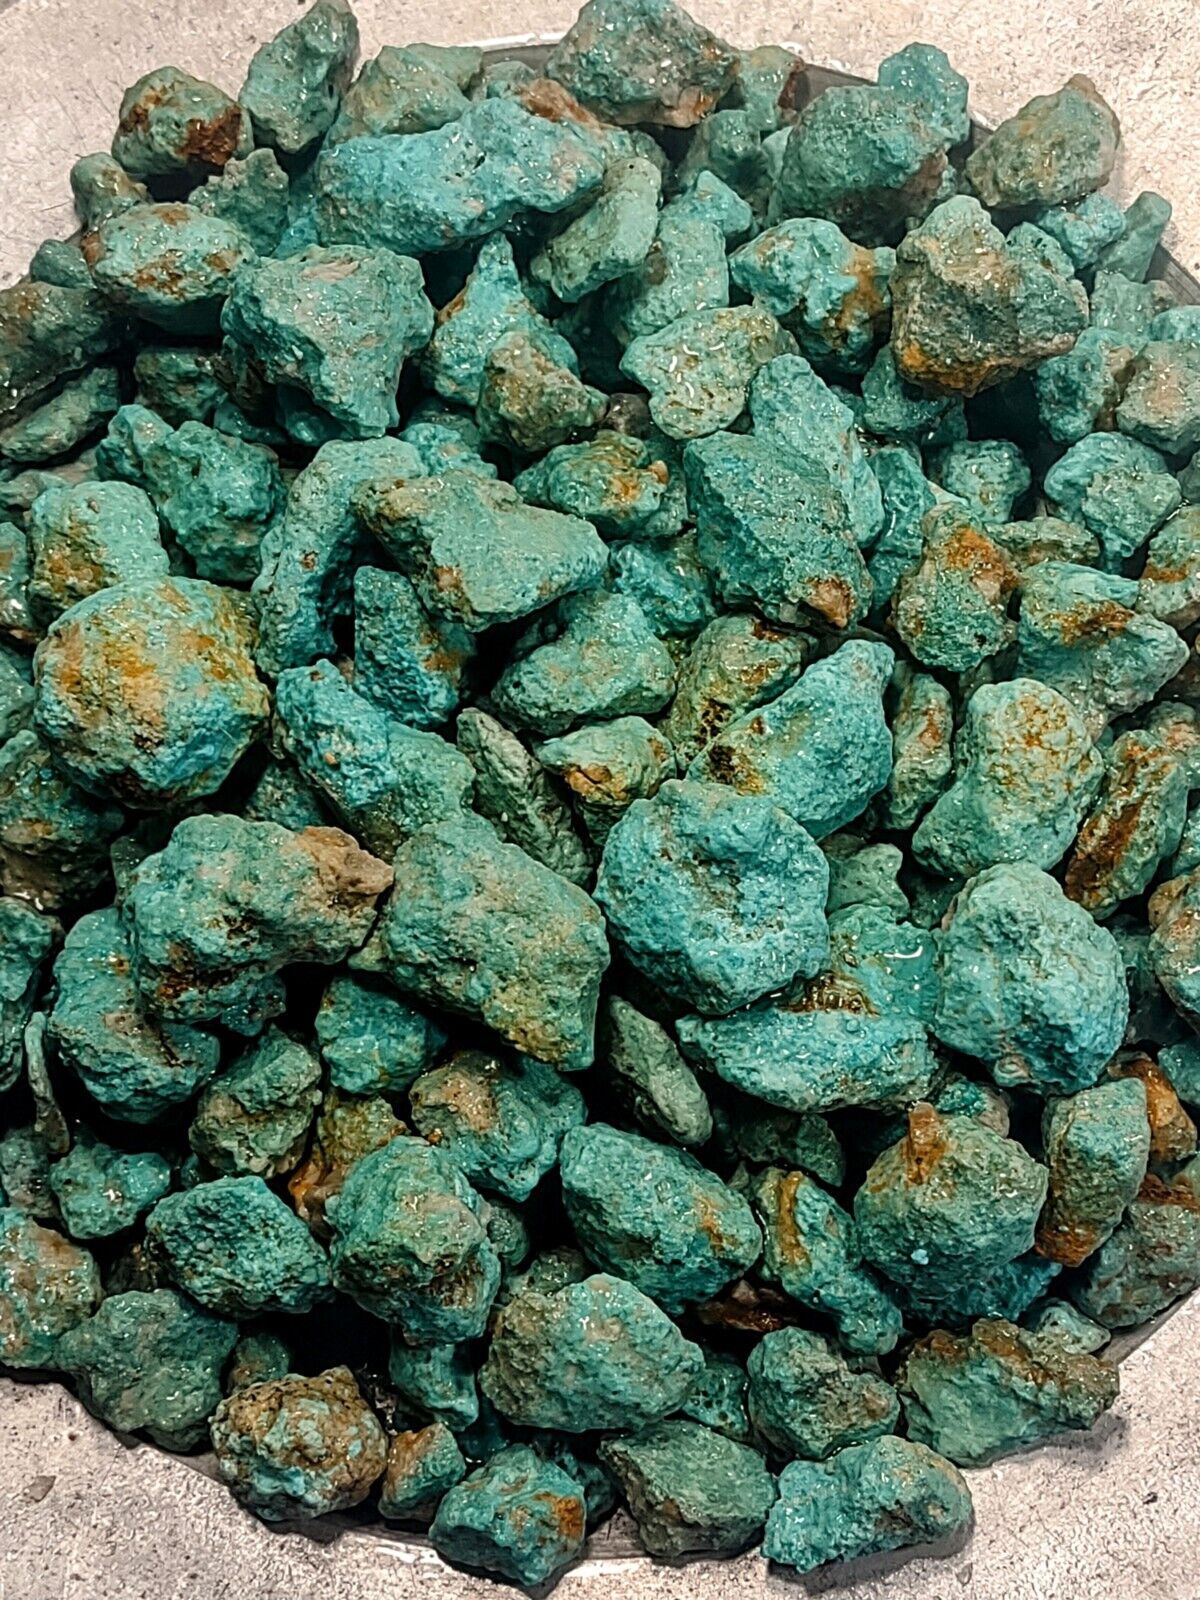 1Lb.  Alarcon Turquoise Rough Nugget Teal Very Nice Larger Chunks Makes Nice Cab